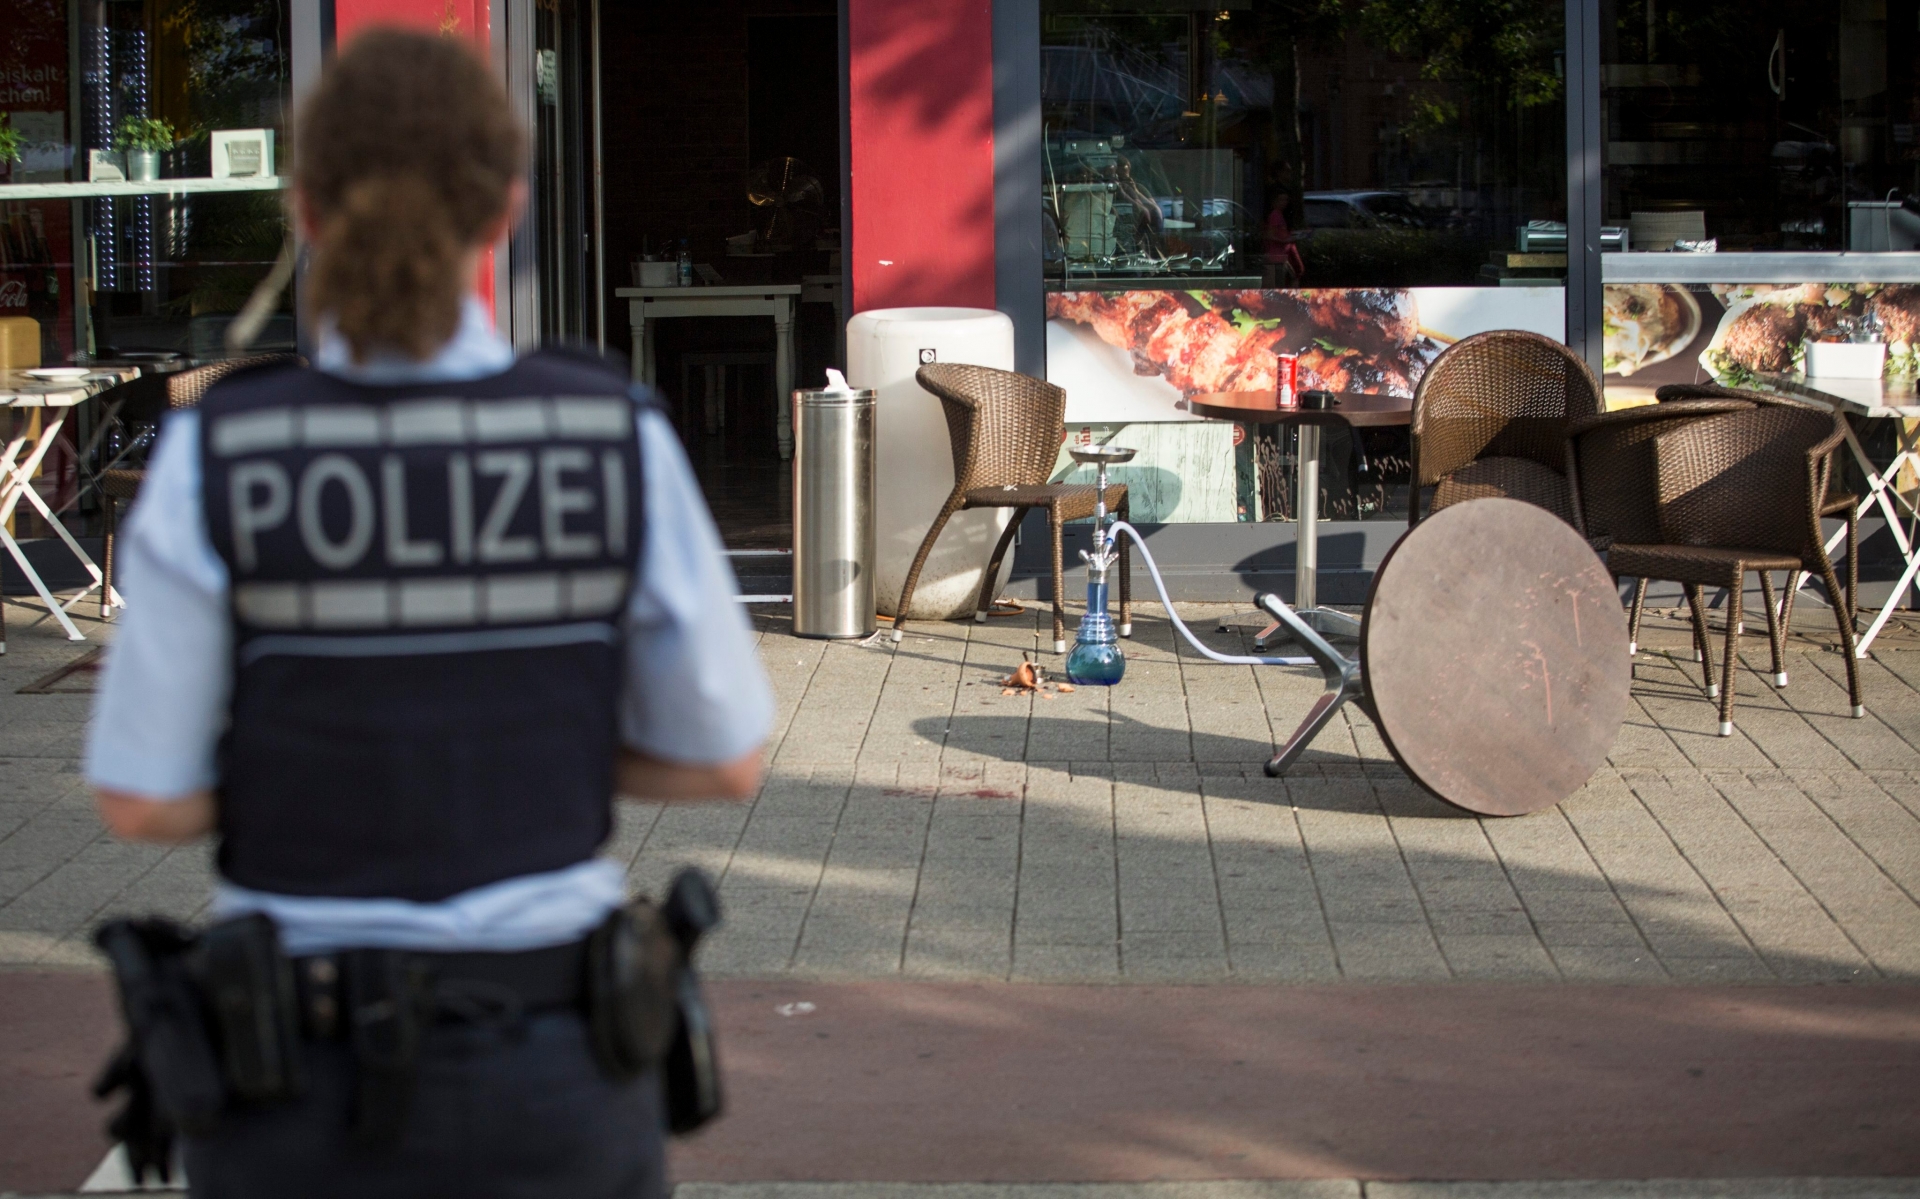 epa05439387 A policewoman in front of a cafe in Reutlingen, Germany, 24 July 2016. Nearby, a man reportedly killed a woman with a machete and injured two other people. The man was arrested. The motive of the man and his background are still unknown.  EPA/CHRISTOPH SCHMIDT GERMANY CRIME